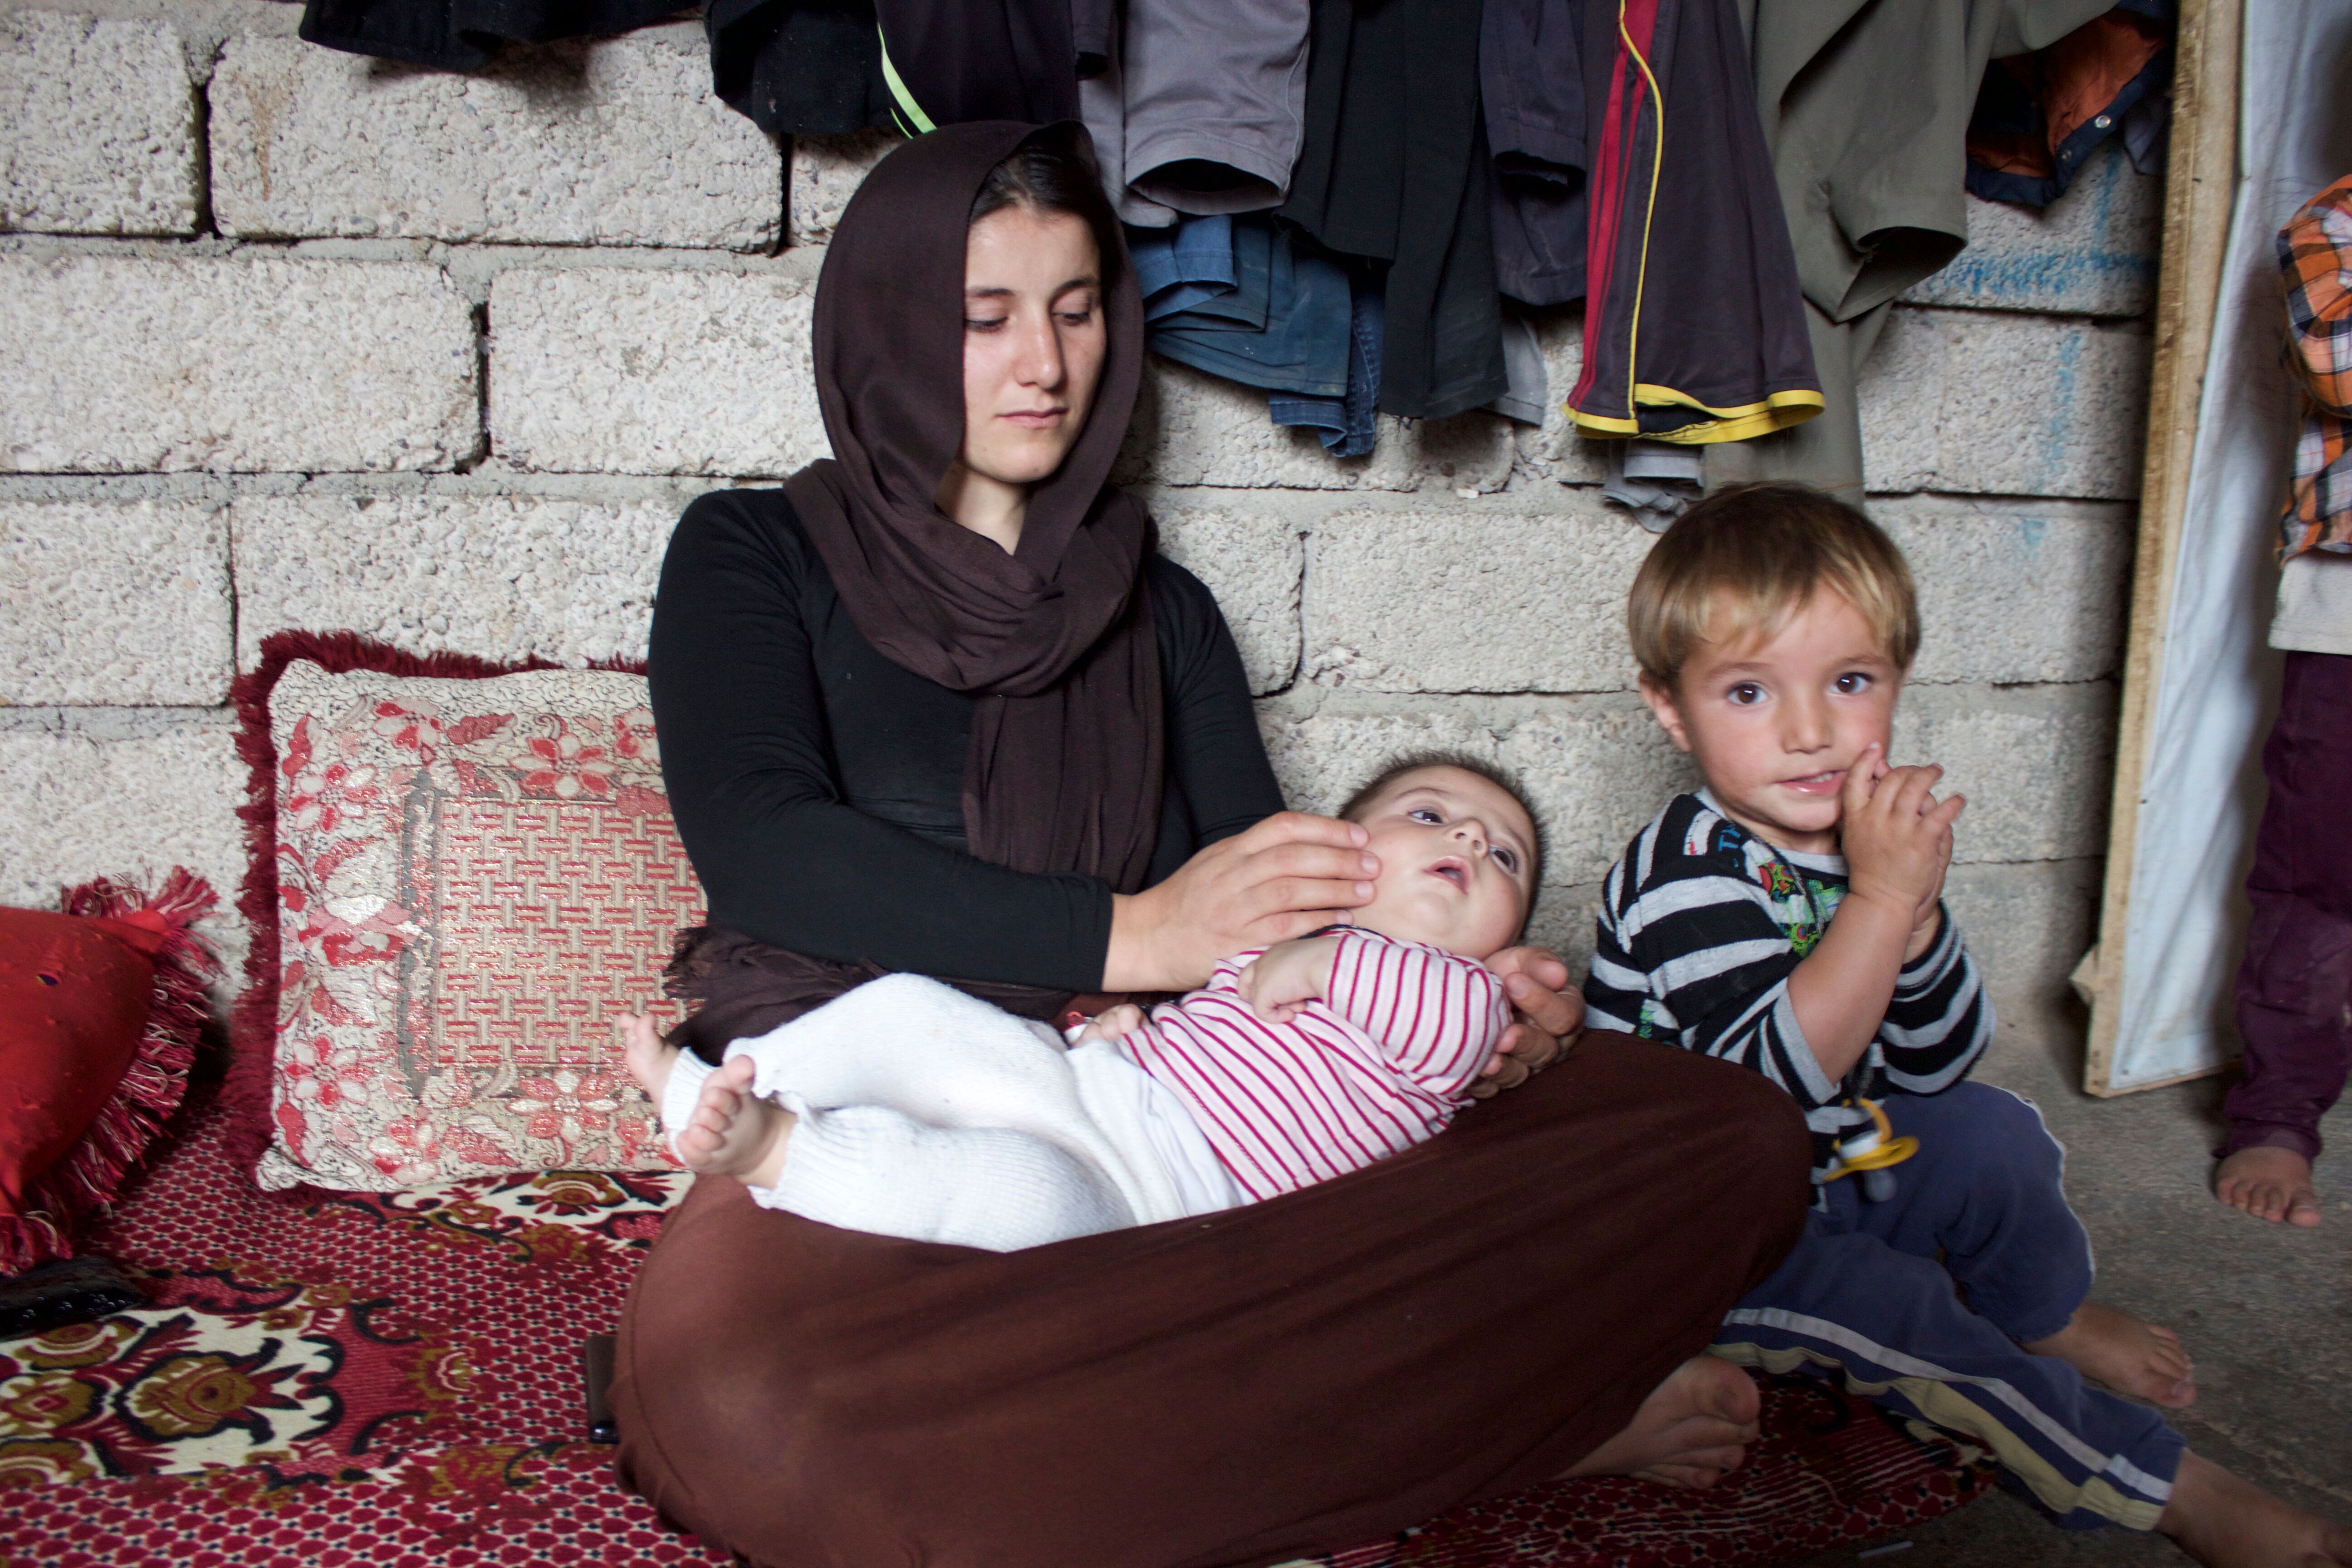 Amsha Ali Alyas cares for her sons Muiad and Delbrin in her parent’s home outside the Iraqi city of Duhok. She escaped from ISIS captivity in the summer of 2014. Image by Emily Feldman. Iraq, 2015.